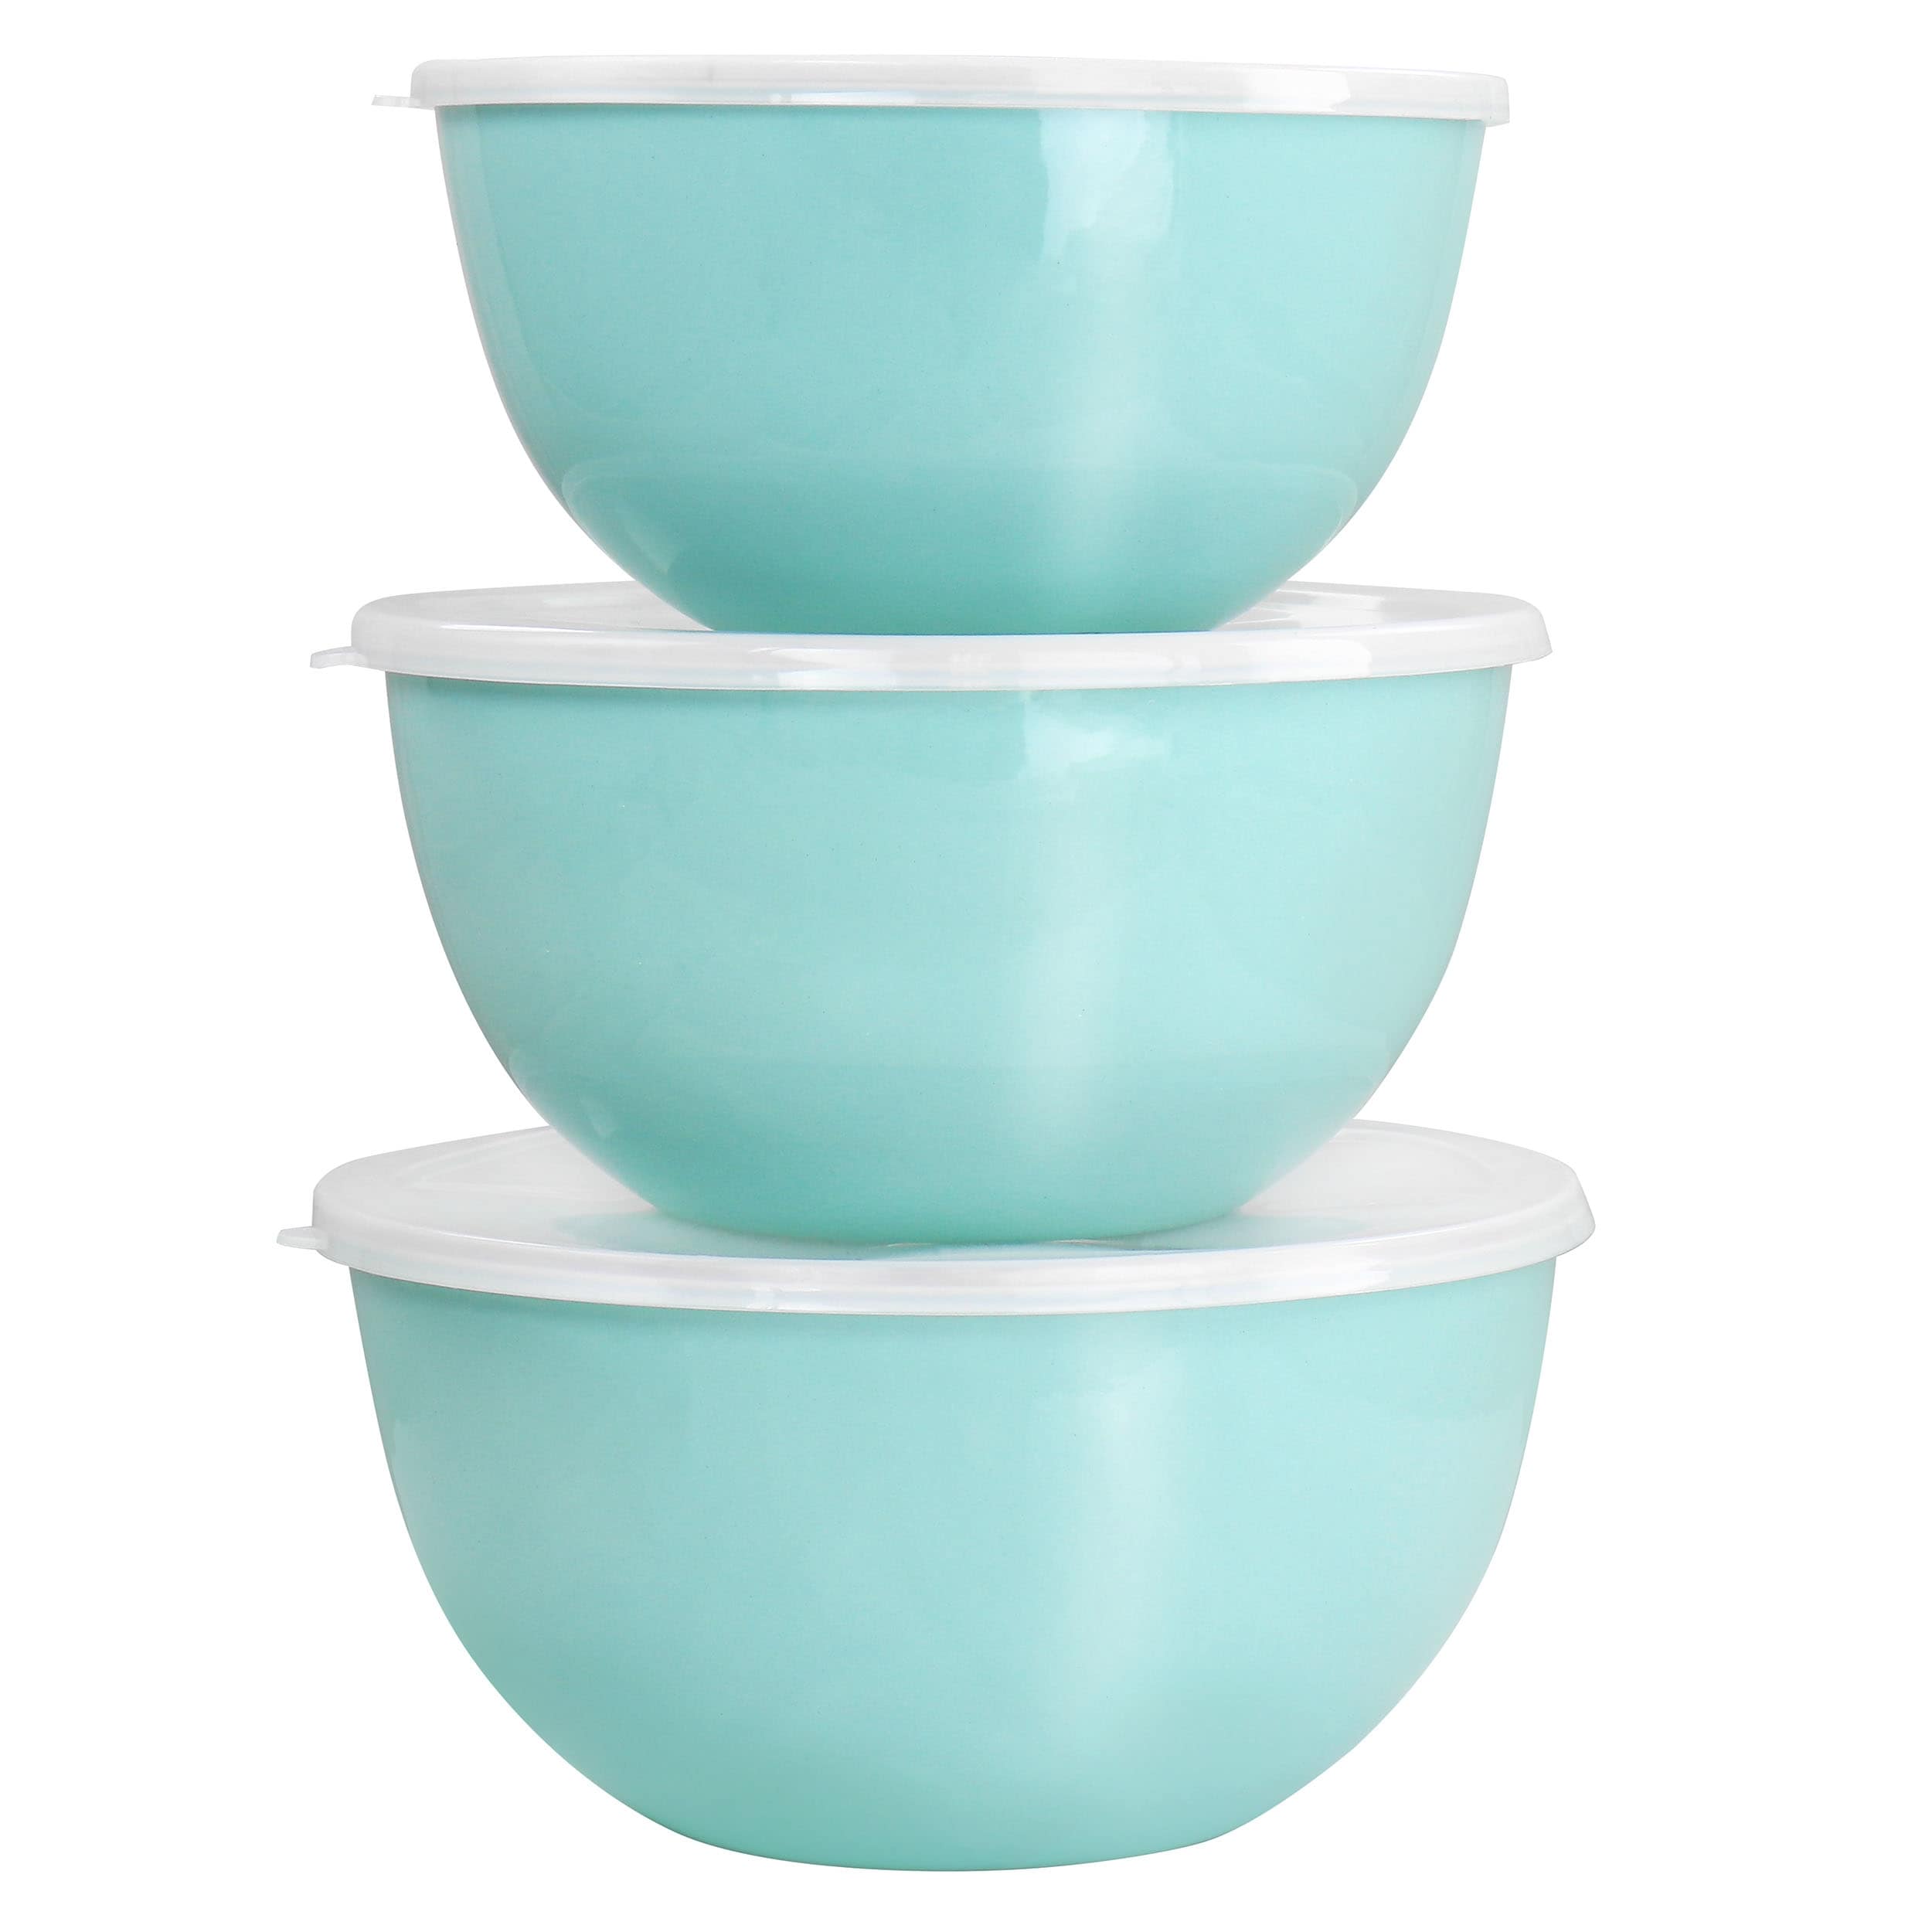 https://ak1.ostkcdn.com/images/products/is/images/direct/2348449e9fb5241f58ca48a35070280193dd32f3/Martha-Stewart-6-Piece-Enamel-Mixing-Bowl-and-Lid-Set.jpg